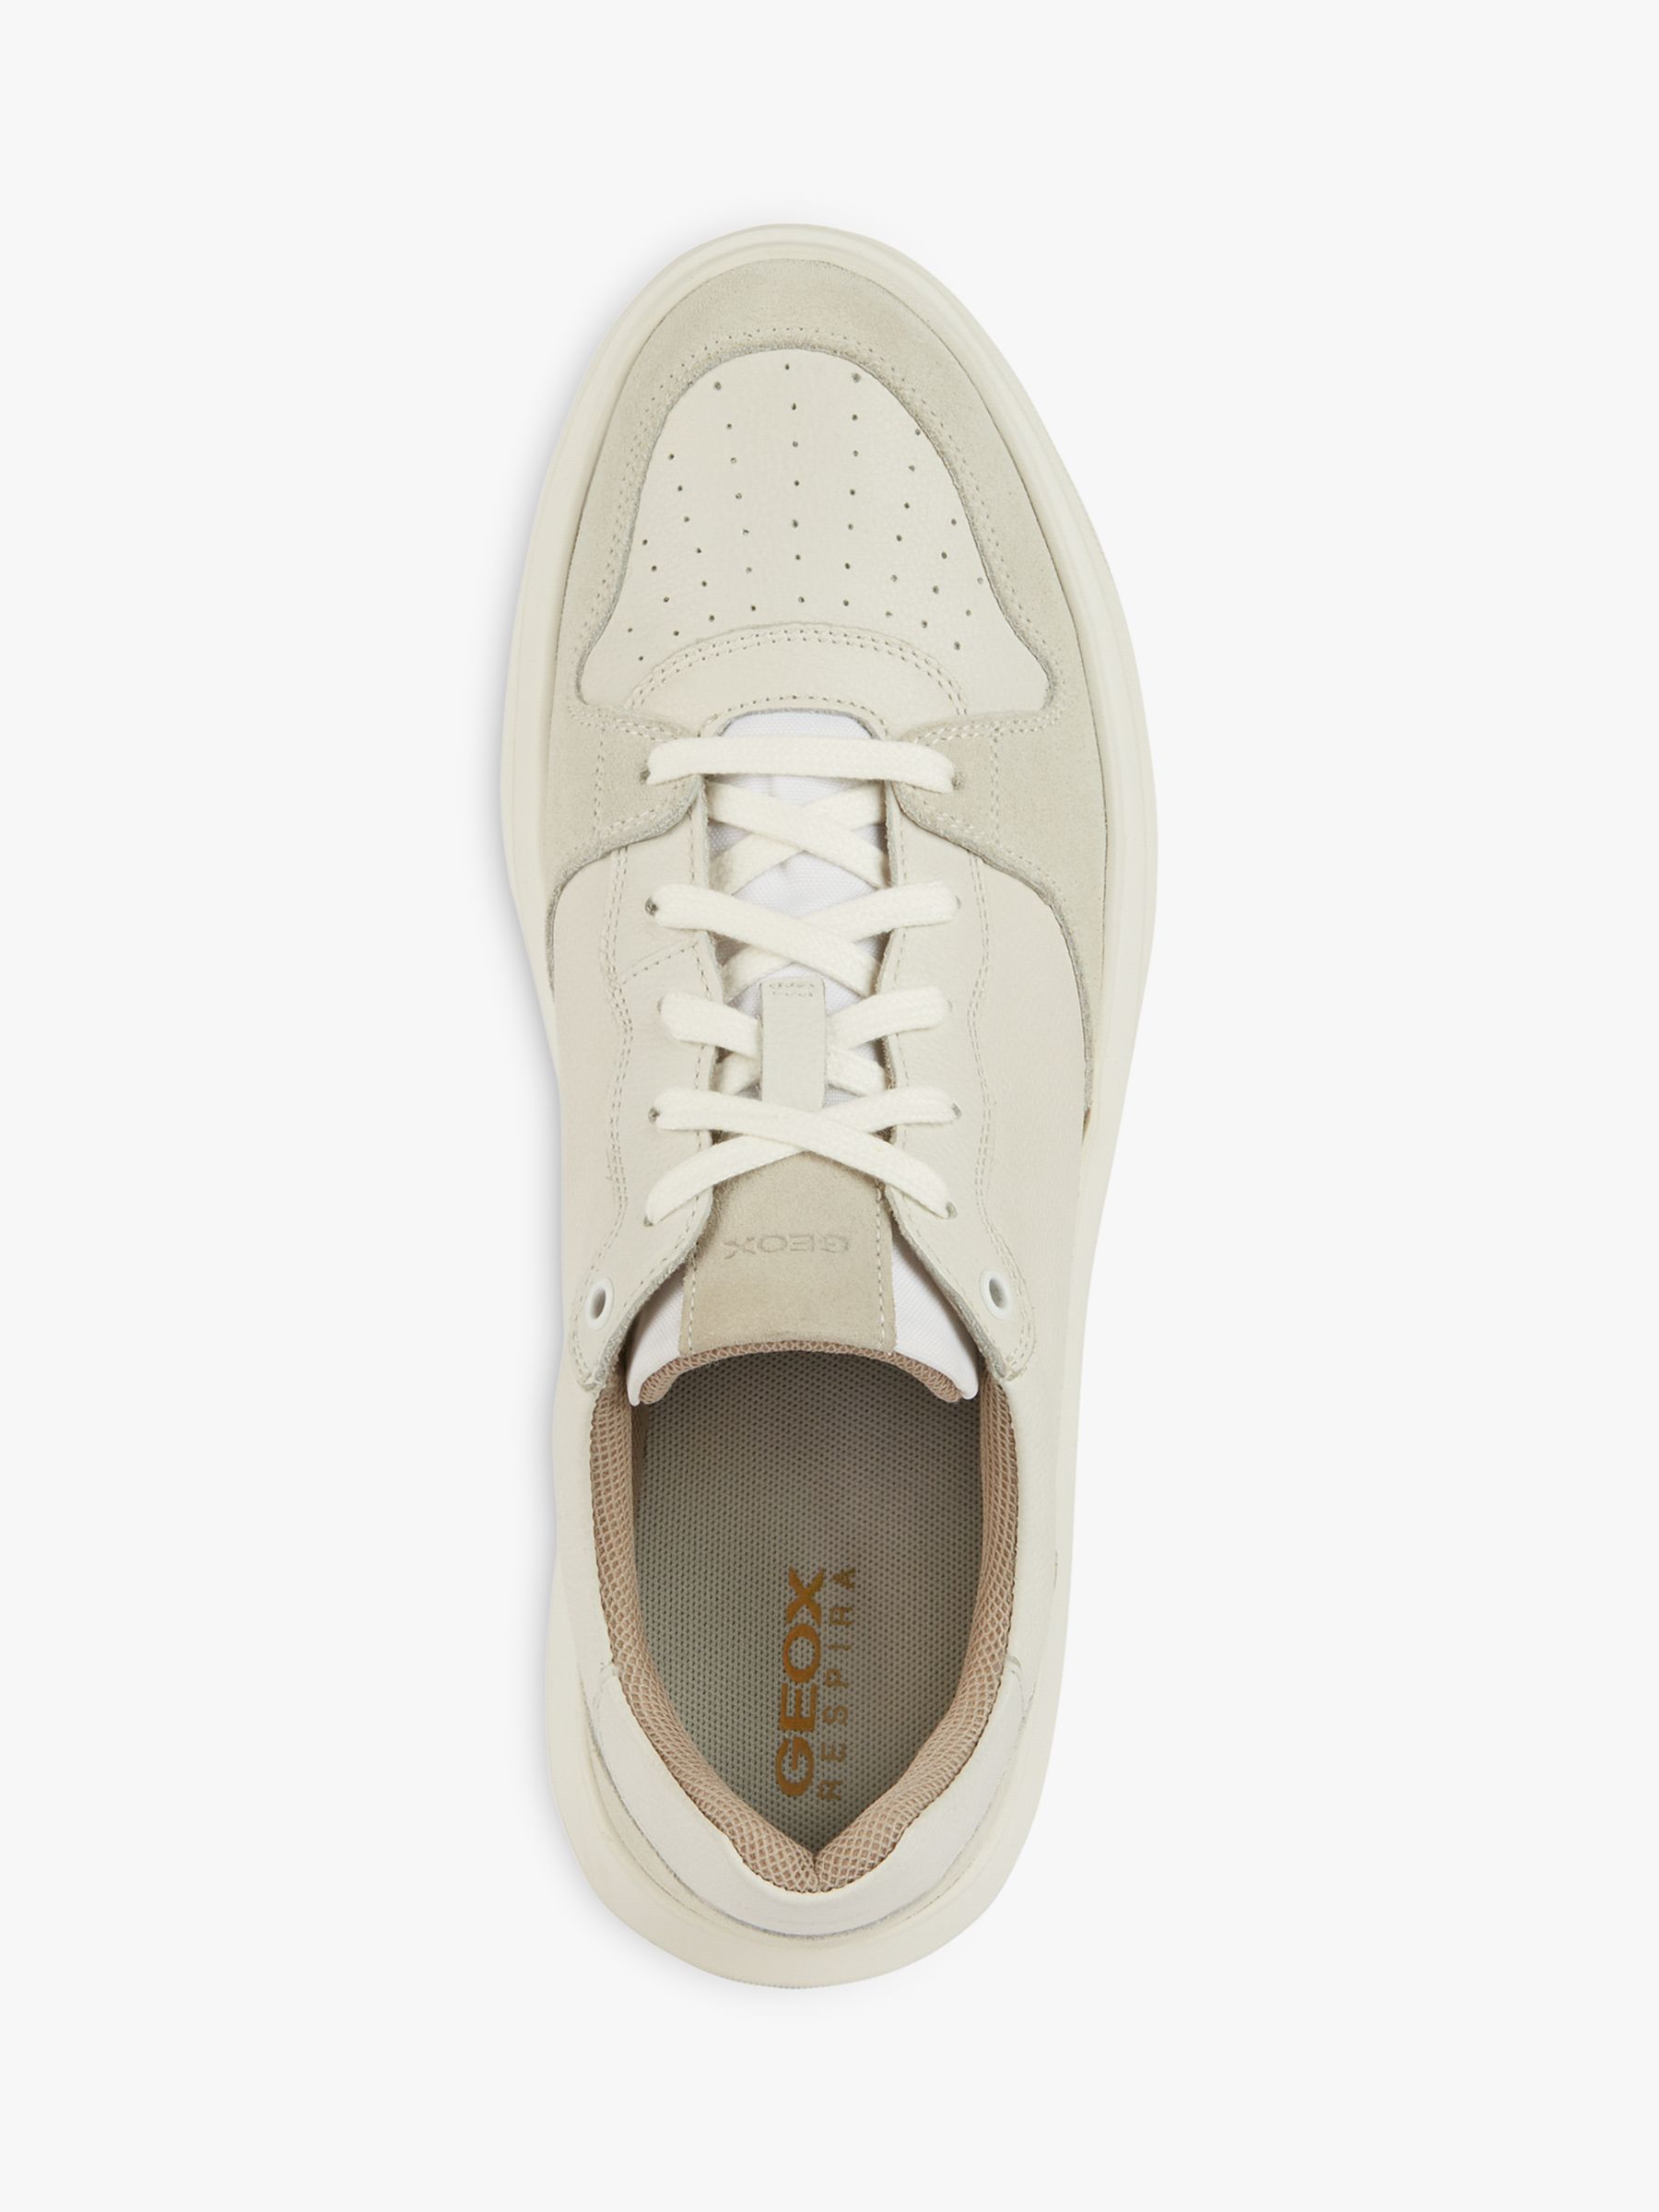 Geox Deiven Low Cut Sneakers, White at John Lewis & Partners